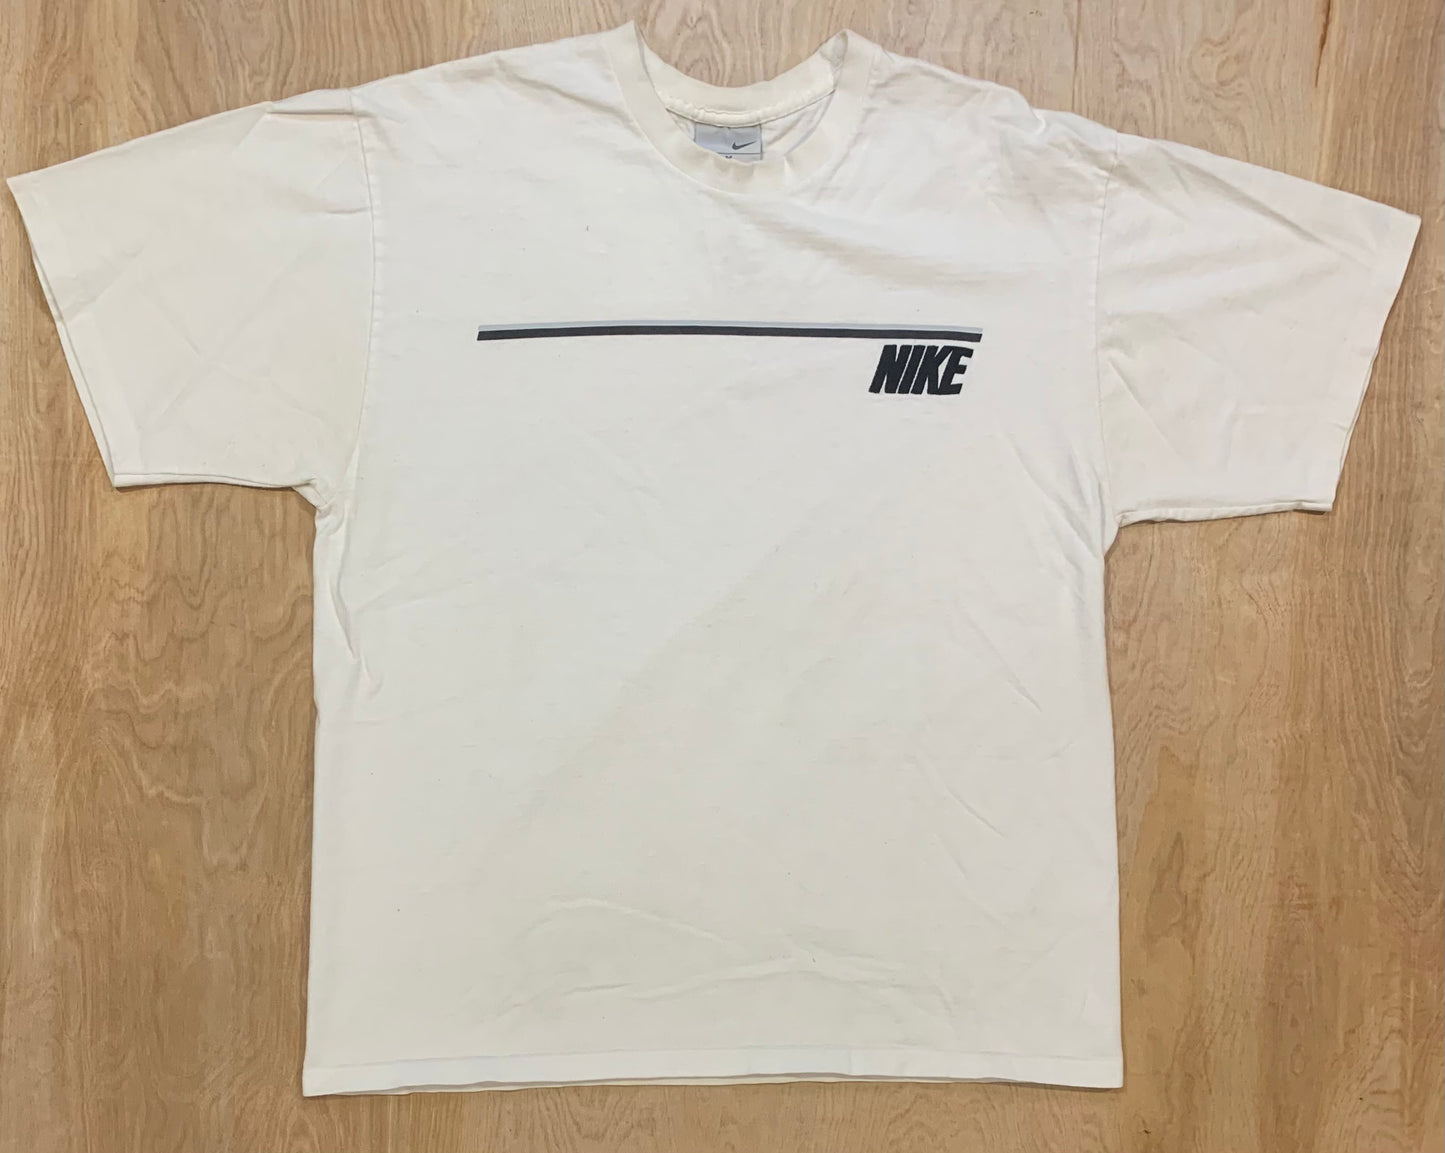 Early 2000's Vintage Nike White T-shirt